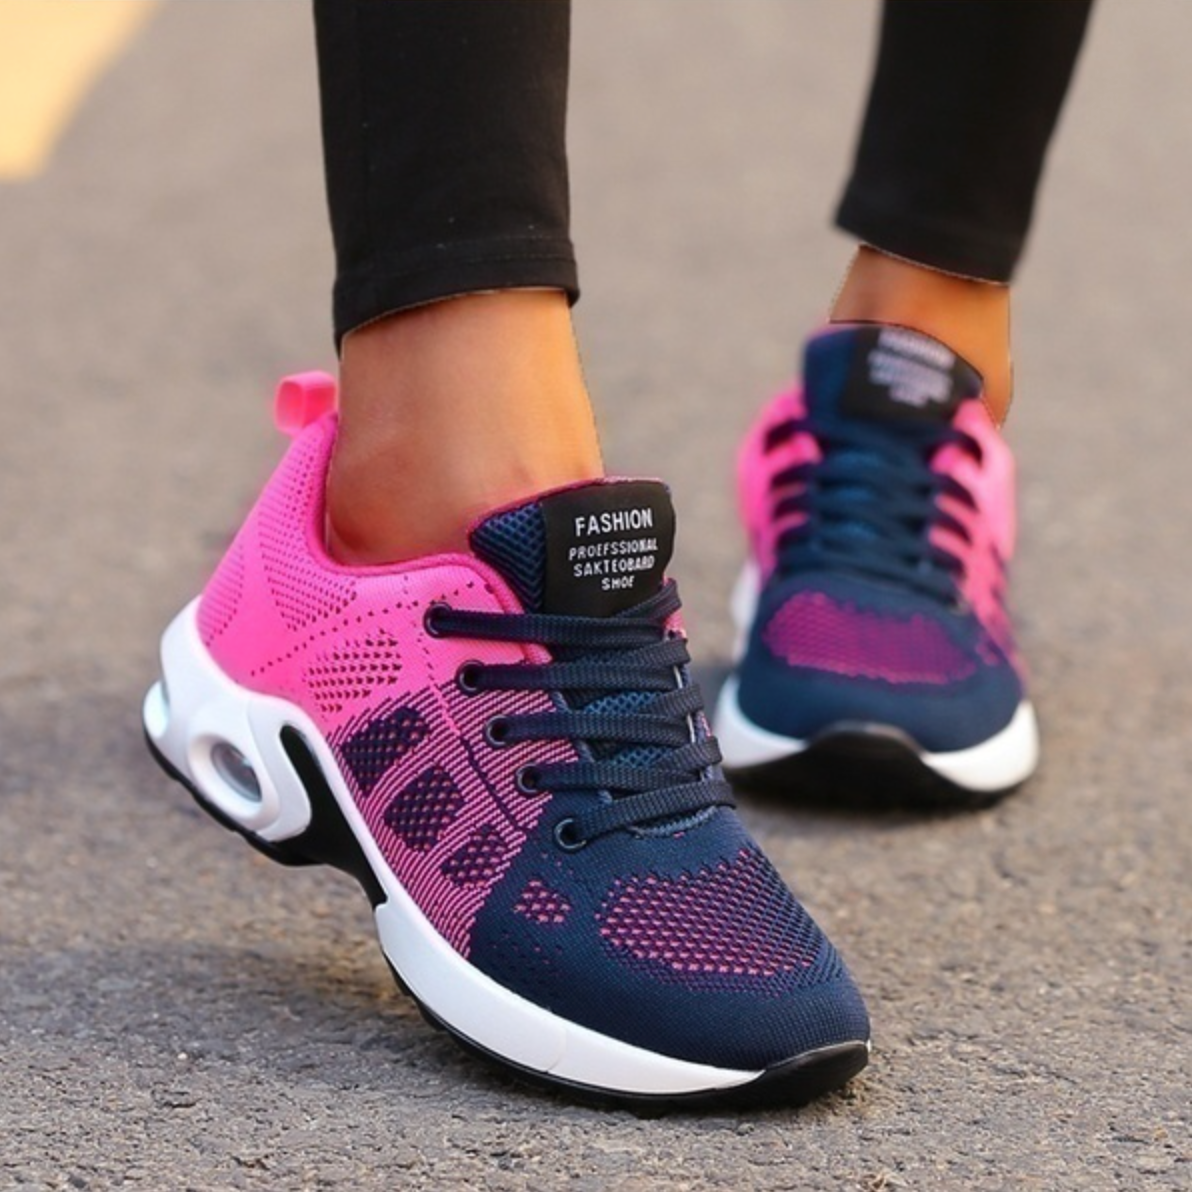 🔥On This Week Sale Off 50%🔥 Women Orthopedic Corrector Lightweight Running Breathable Sneakers